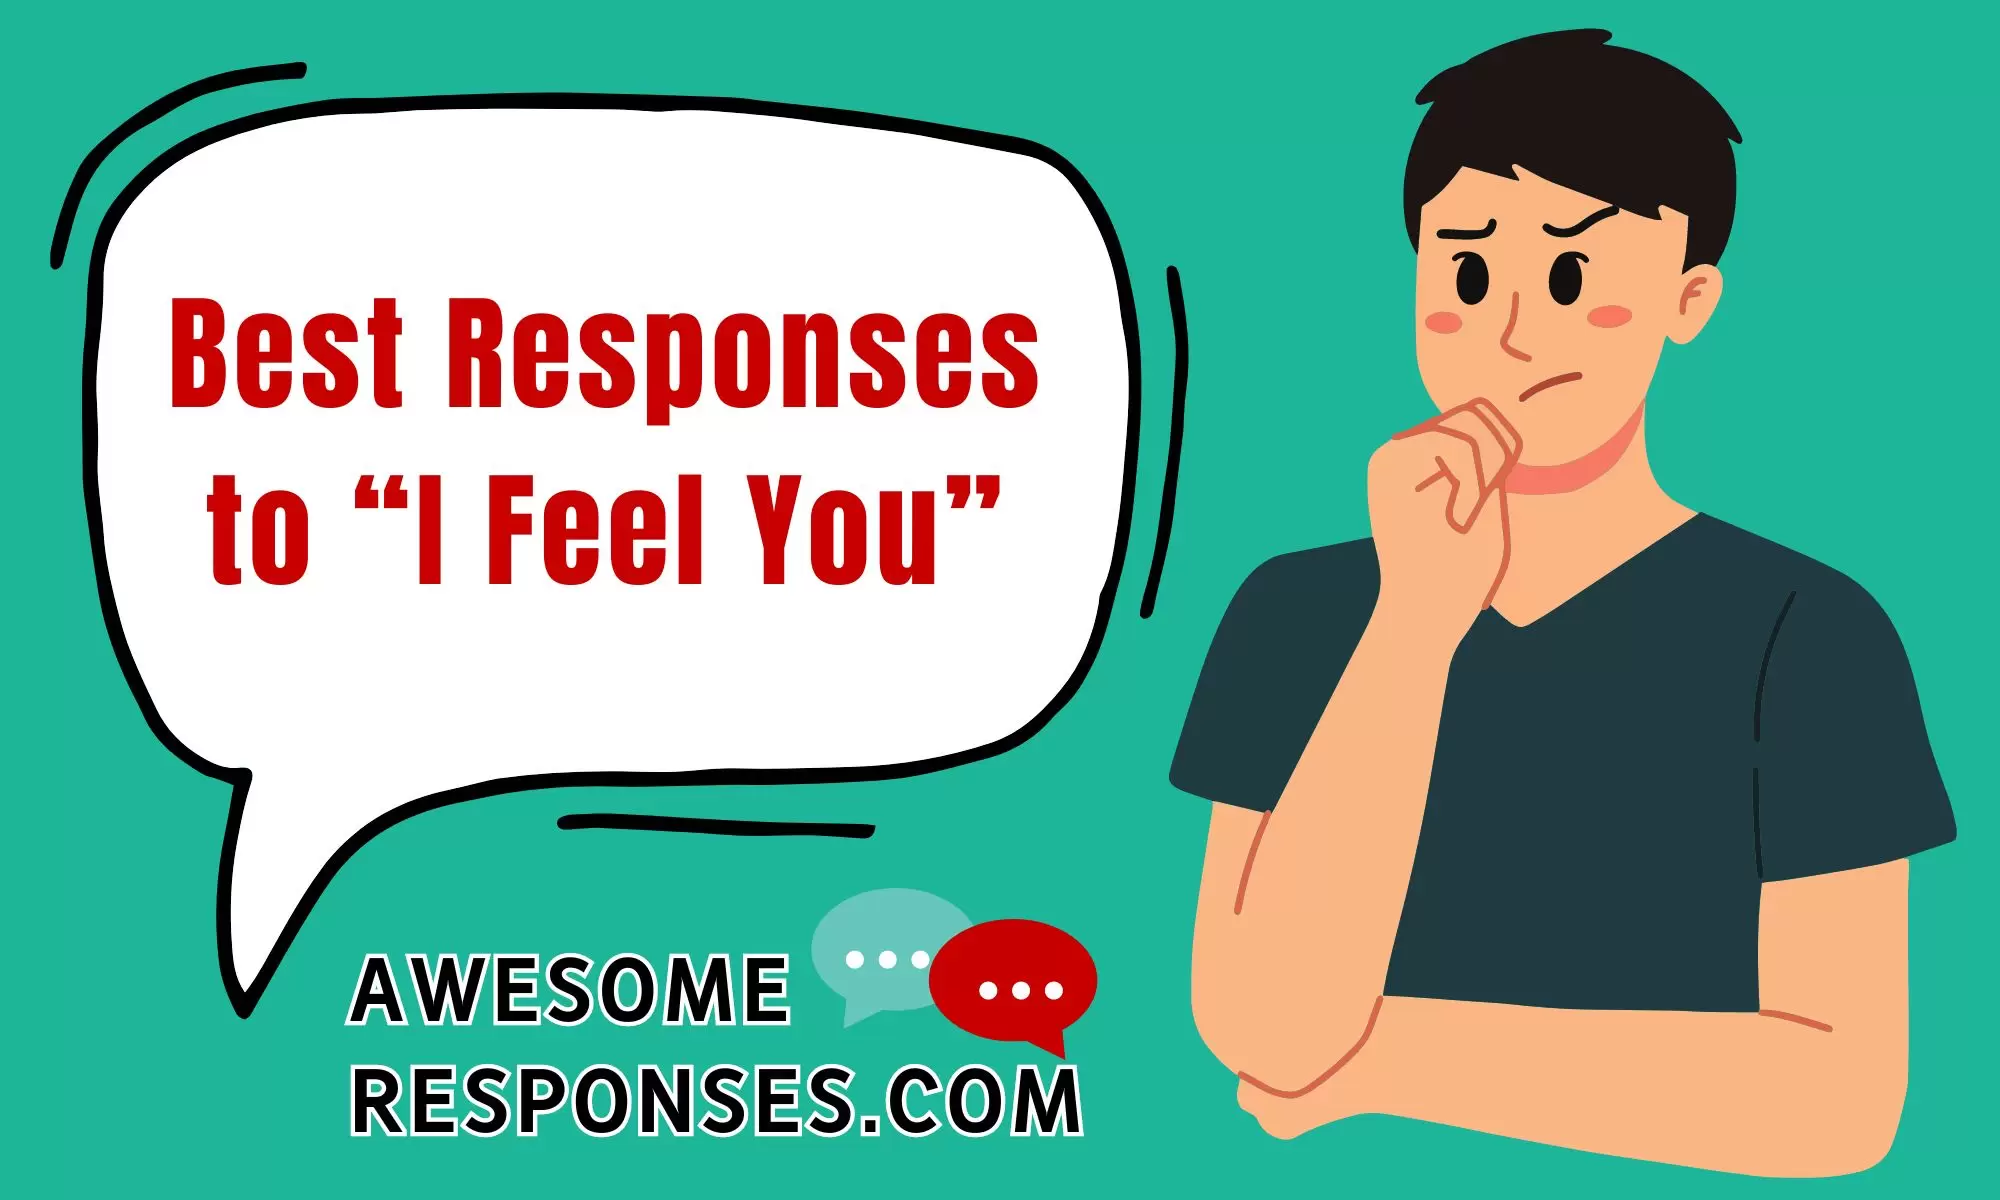 Best Responses to “I Feel You”